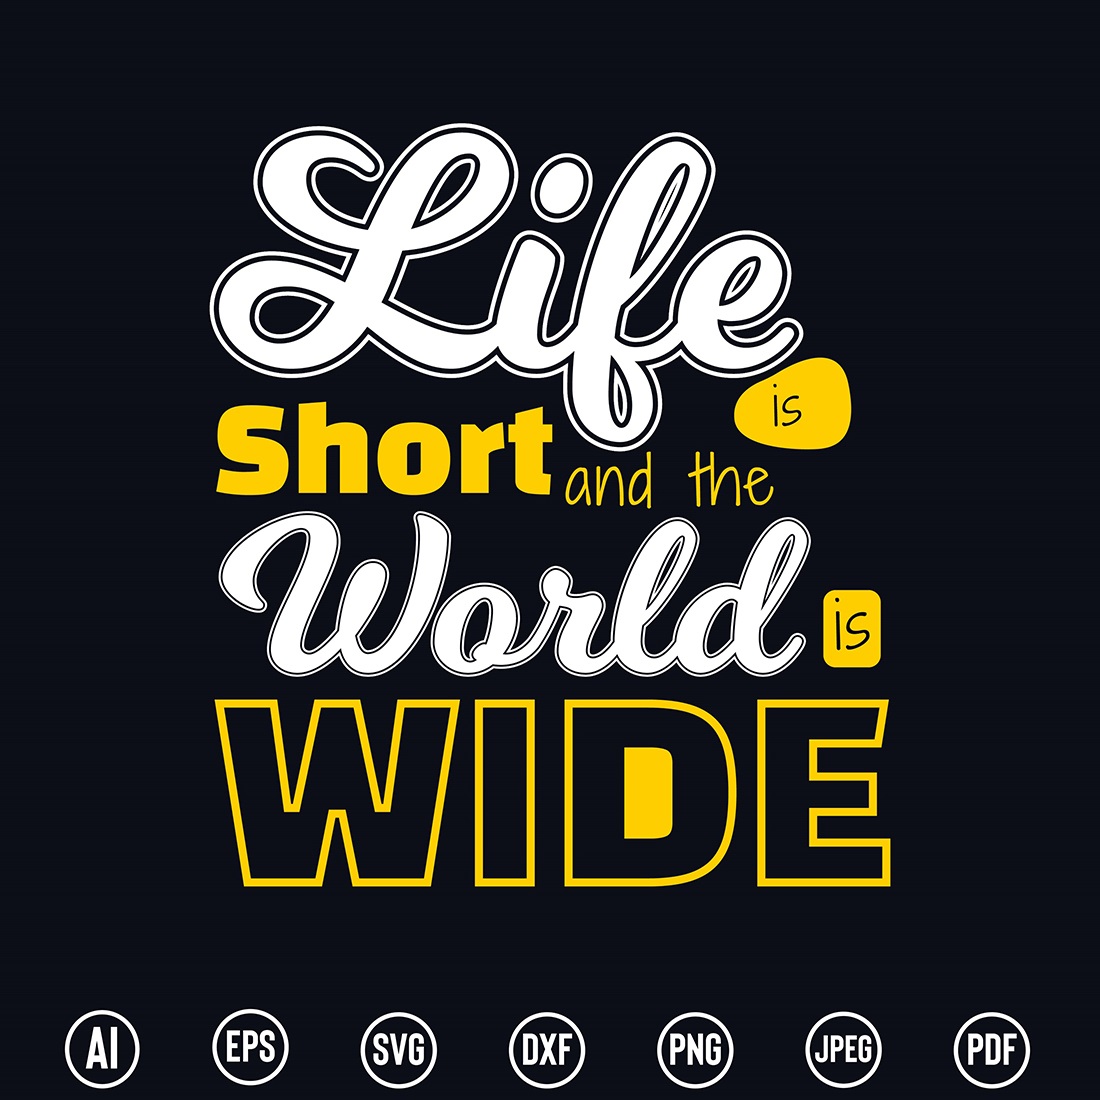 Motivational traveler Typography T-Shirt design with “Life is short and the world is wide” quote for t-shirt, posters, stickers, mug prints, banners, gift cards, labels etc preview image.